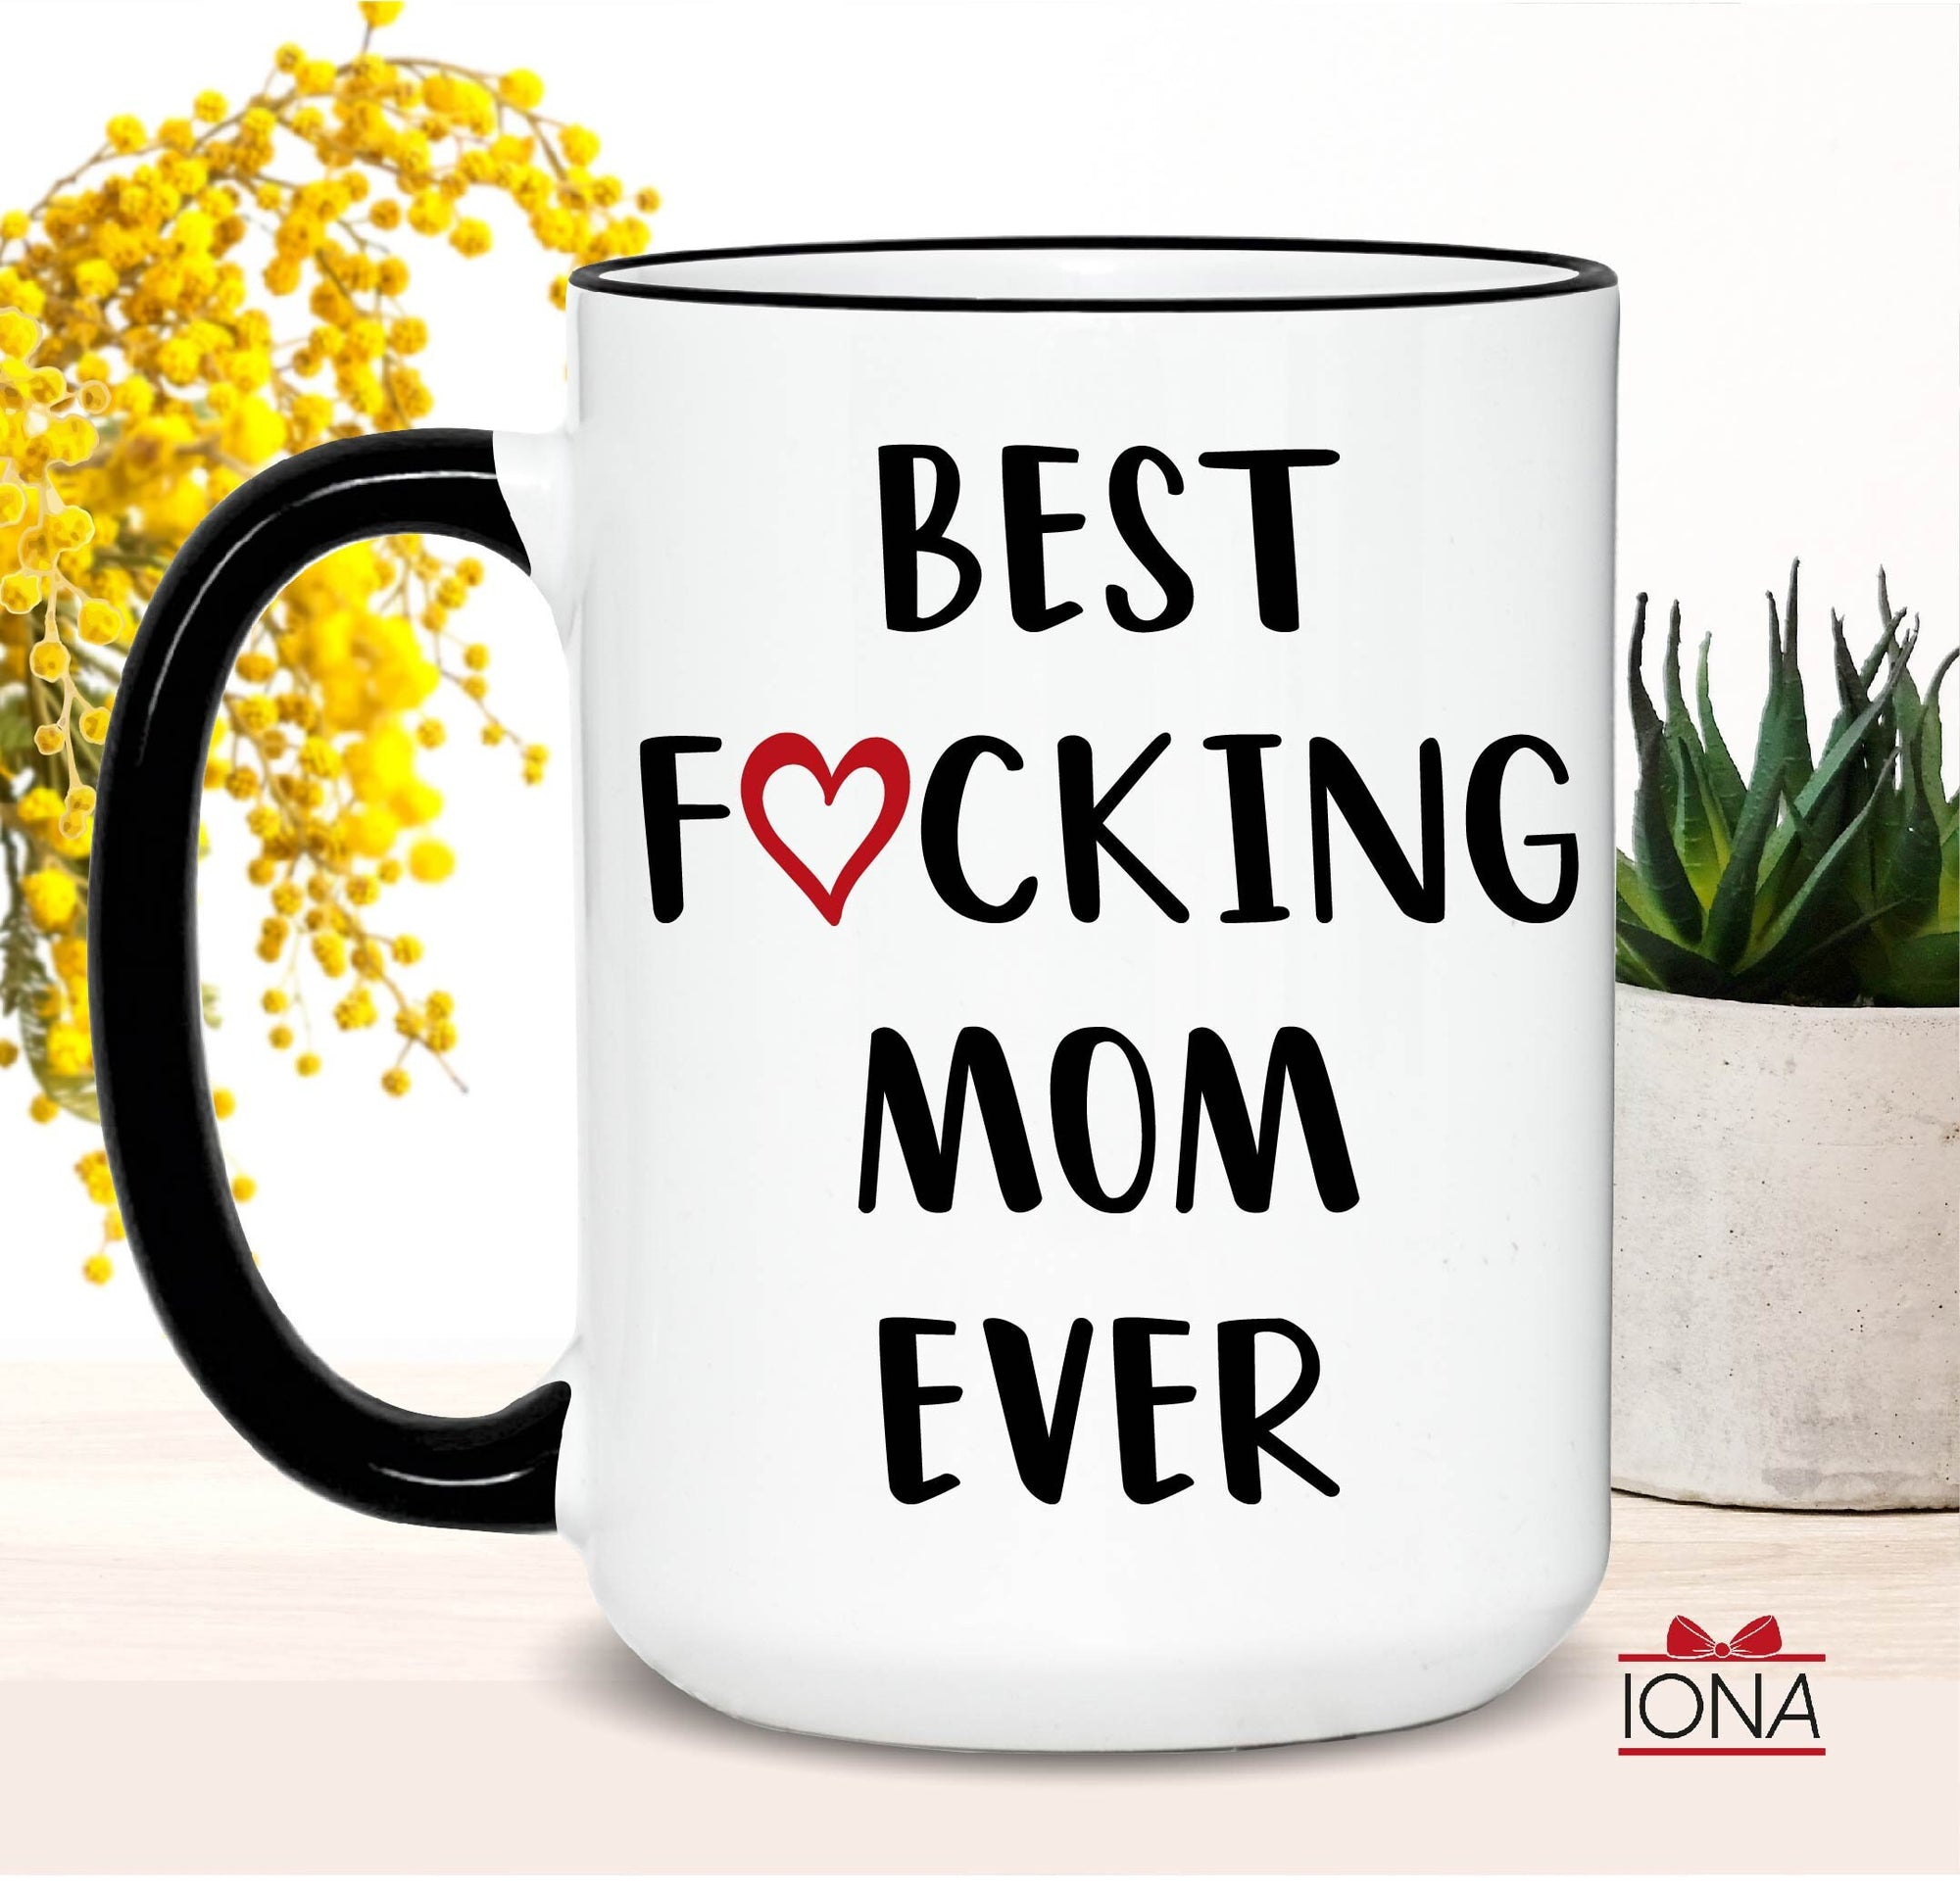 Personalized Funny Mom Gift, Best Mom Ever Mug, Mom Coffee Mug, Best Fucking Mom Ever Mug, Christmas Mother Gift, Mothers Day gift for mom